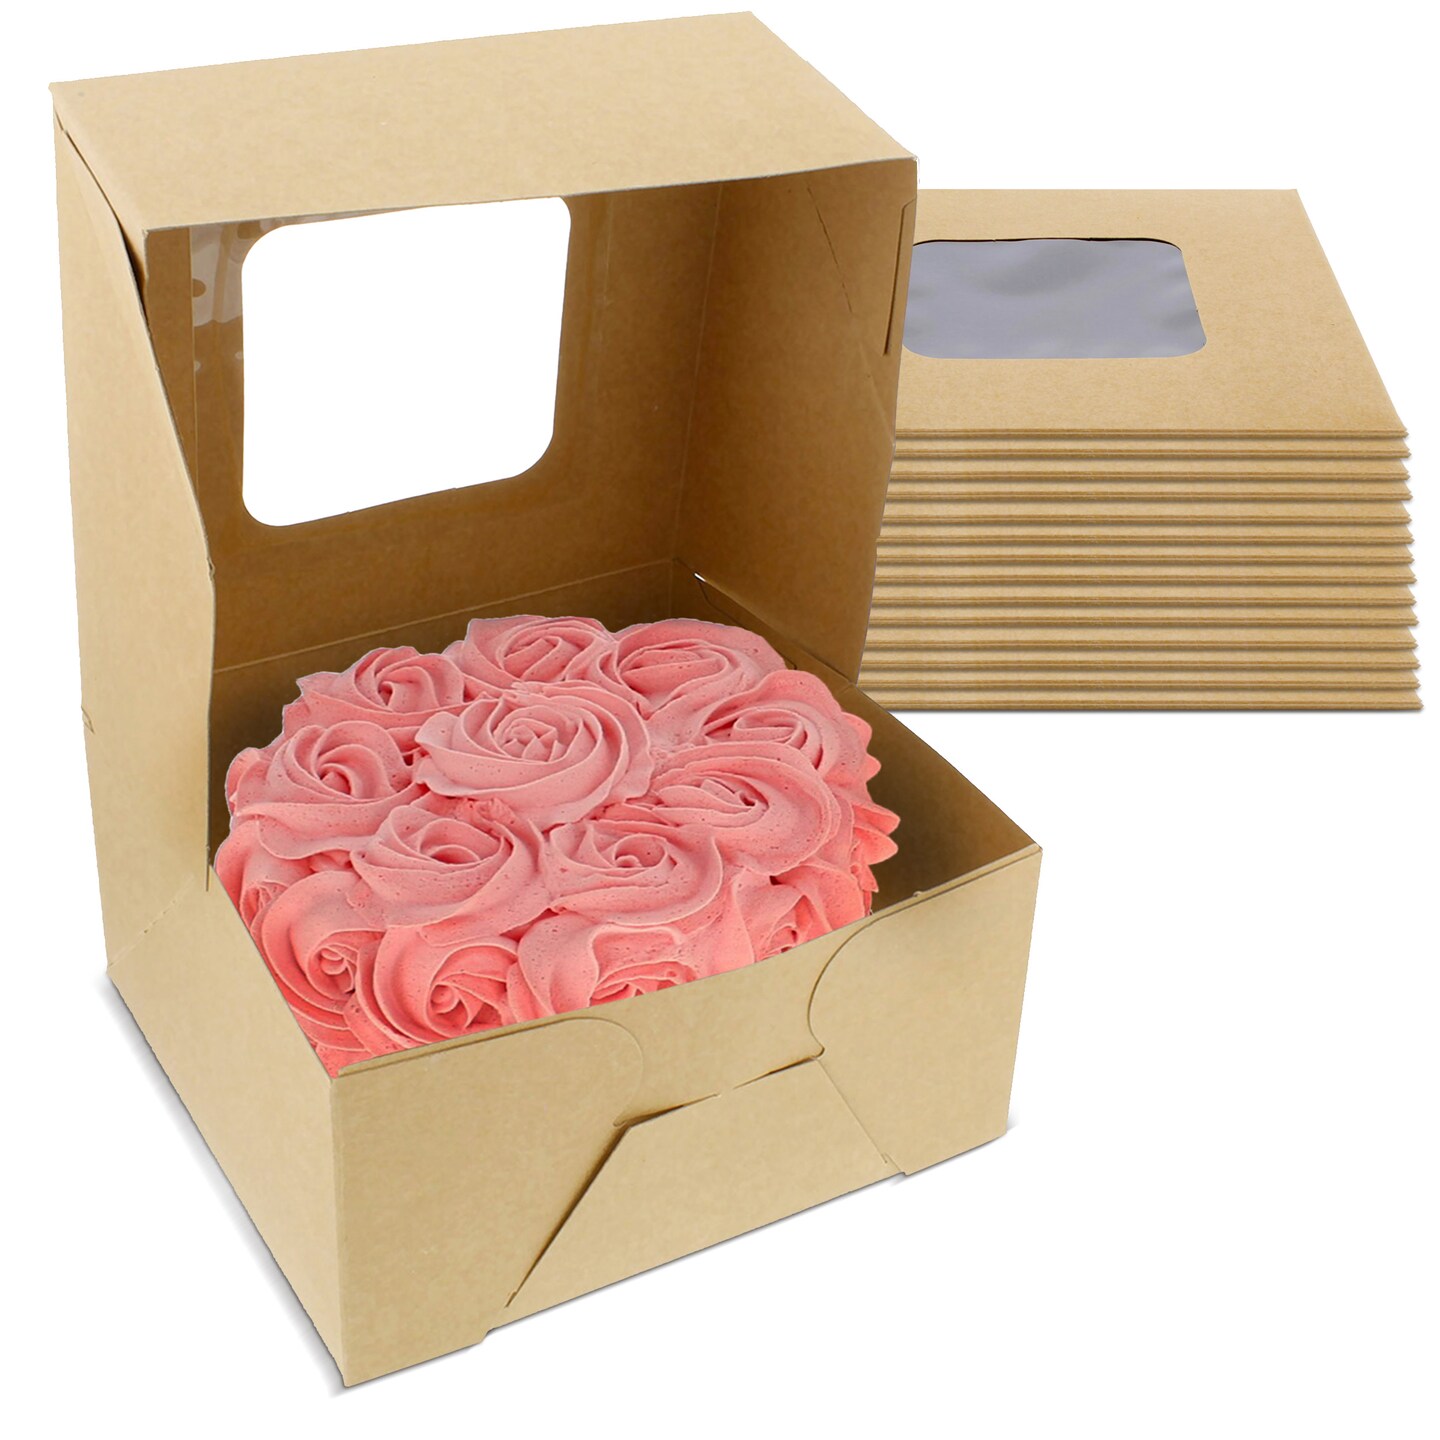 Spec101 Easy Popup White Bakery Boxes with Window 6x6x3 Inch Cake Boxes